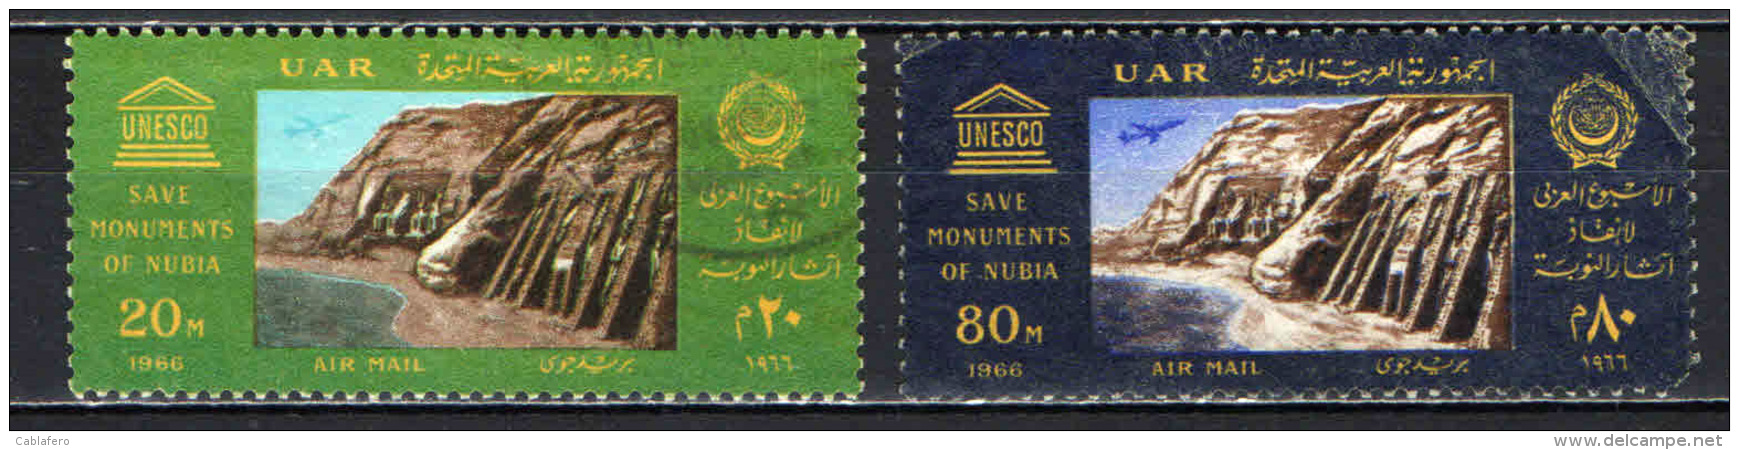 EGITTO - 1966 - Issued To Commemorate The Transfer Of The Temples Of Abu Simbel To A Hilltop, 1963-66 - USATO - Posta Aerea